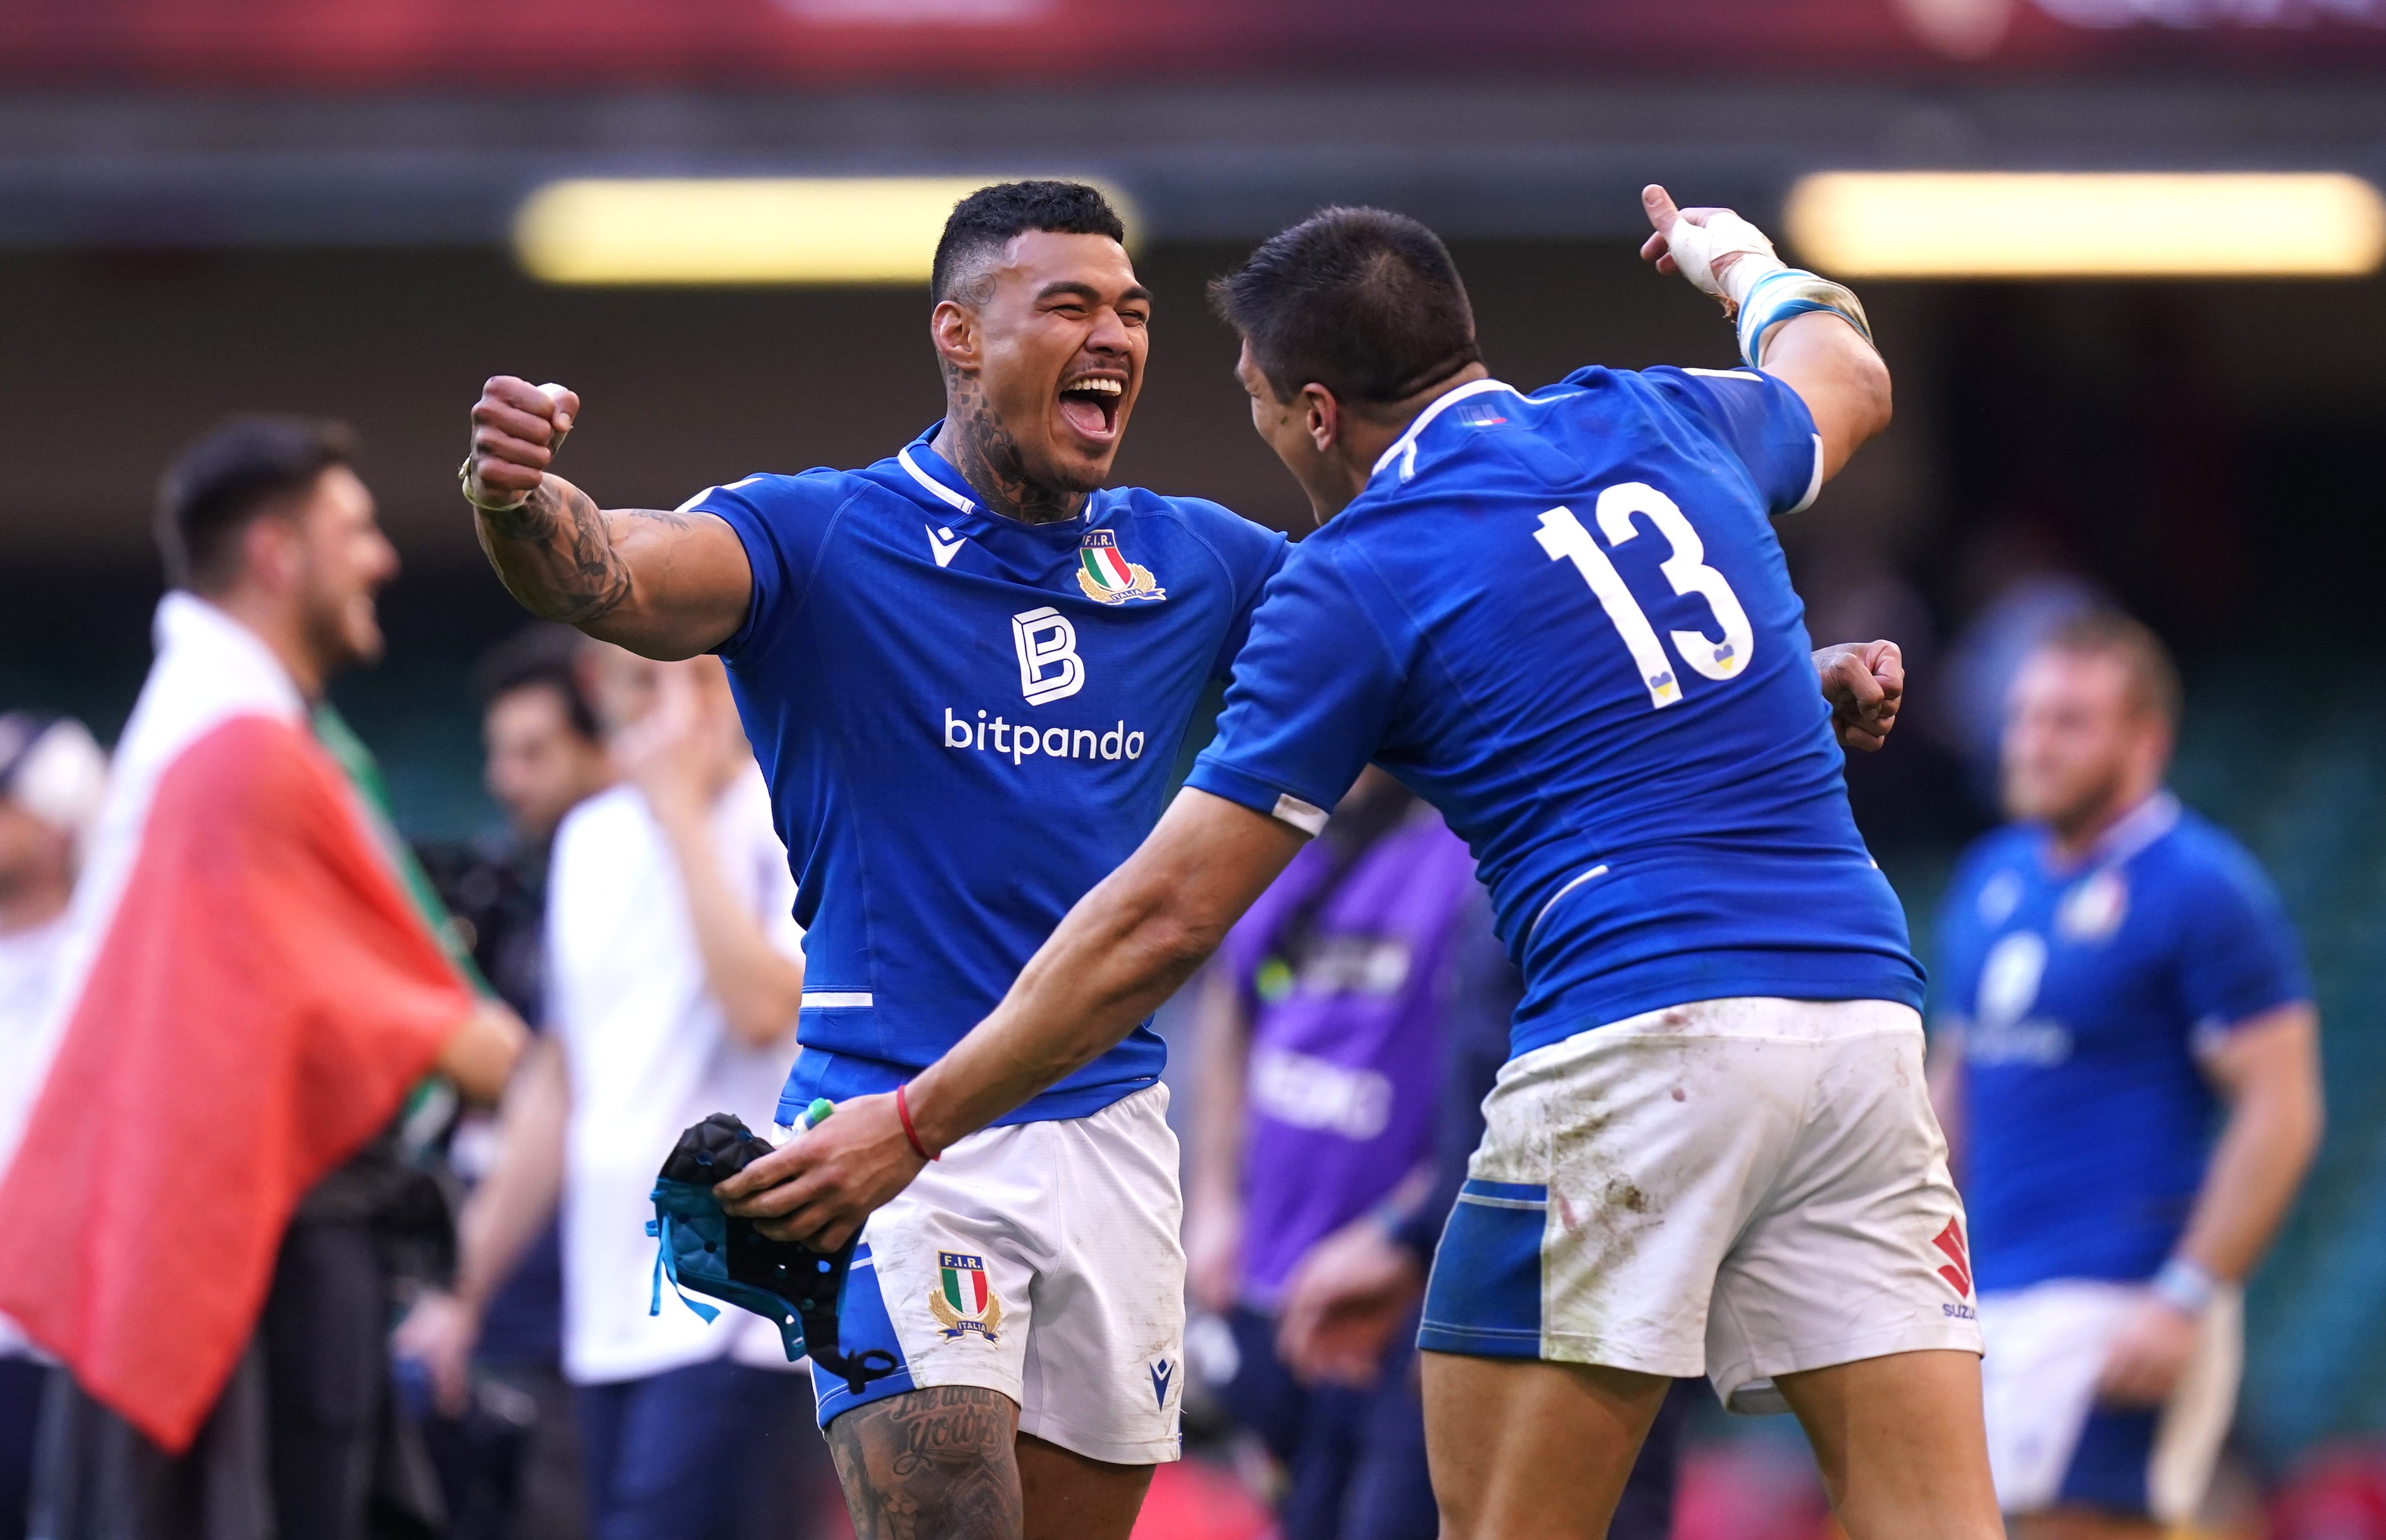 Italy players Monty Ioane, left, and Ignacio Brex Juan celebrate their Six Nations victory over Cardiff (Mike Egerton/PA)